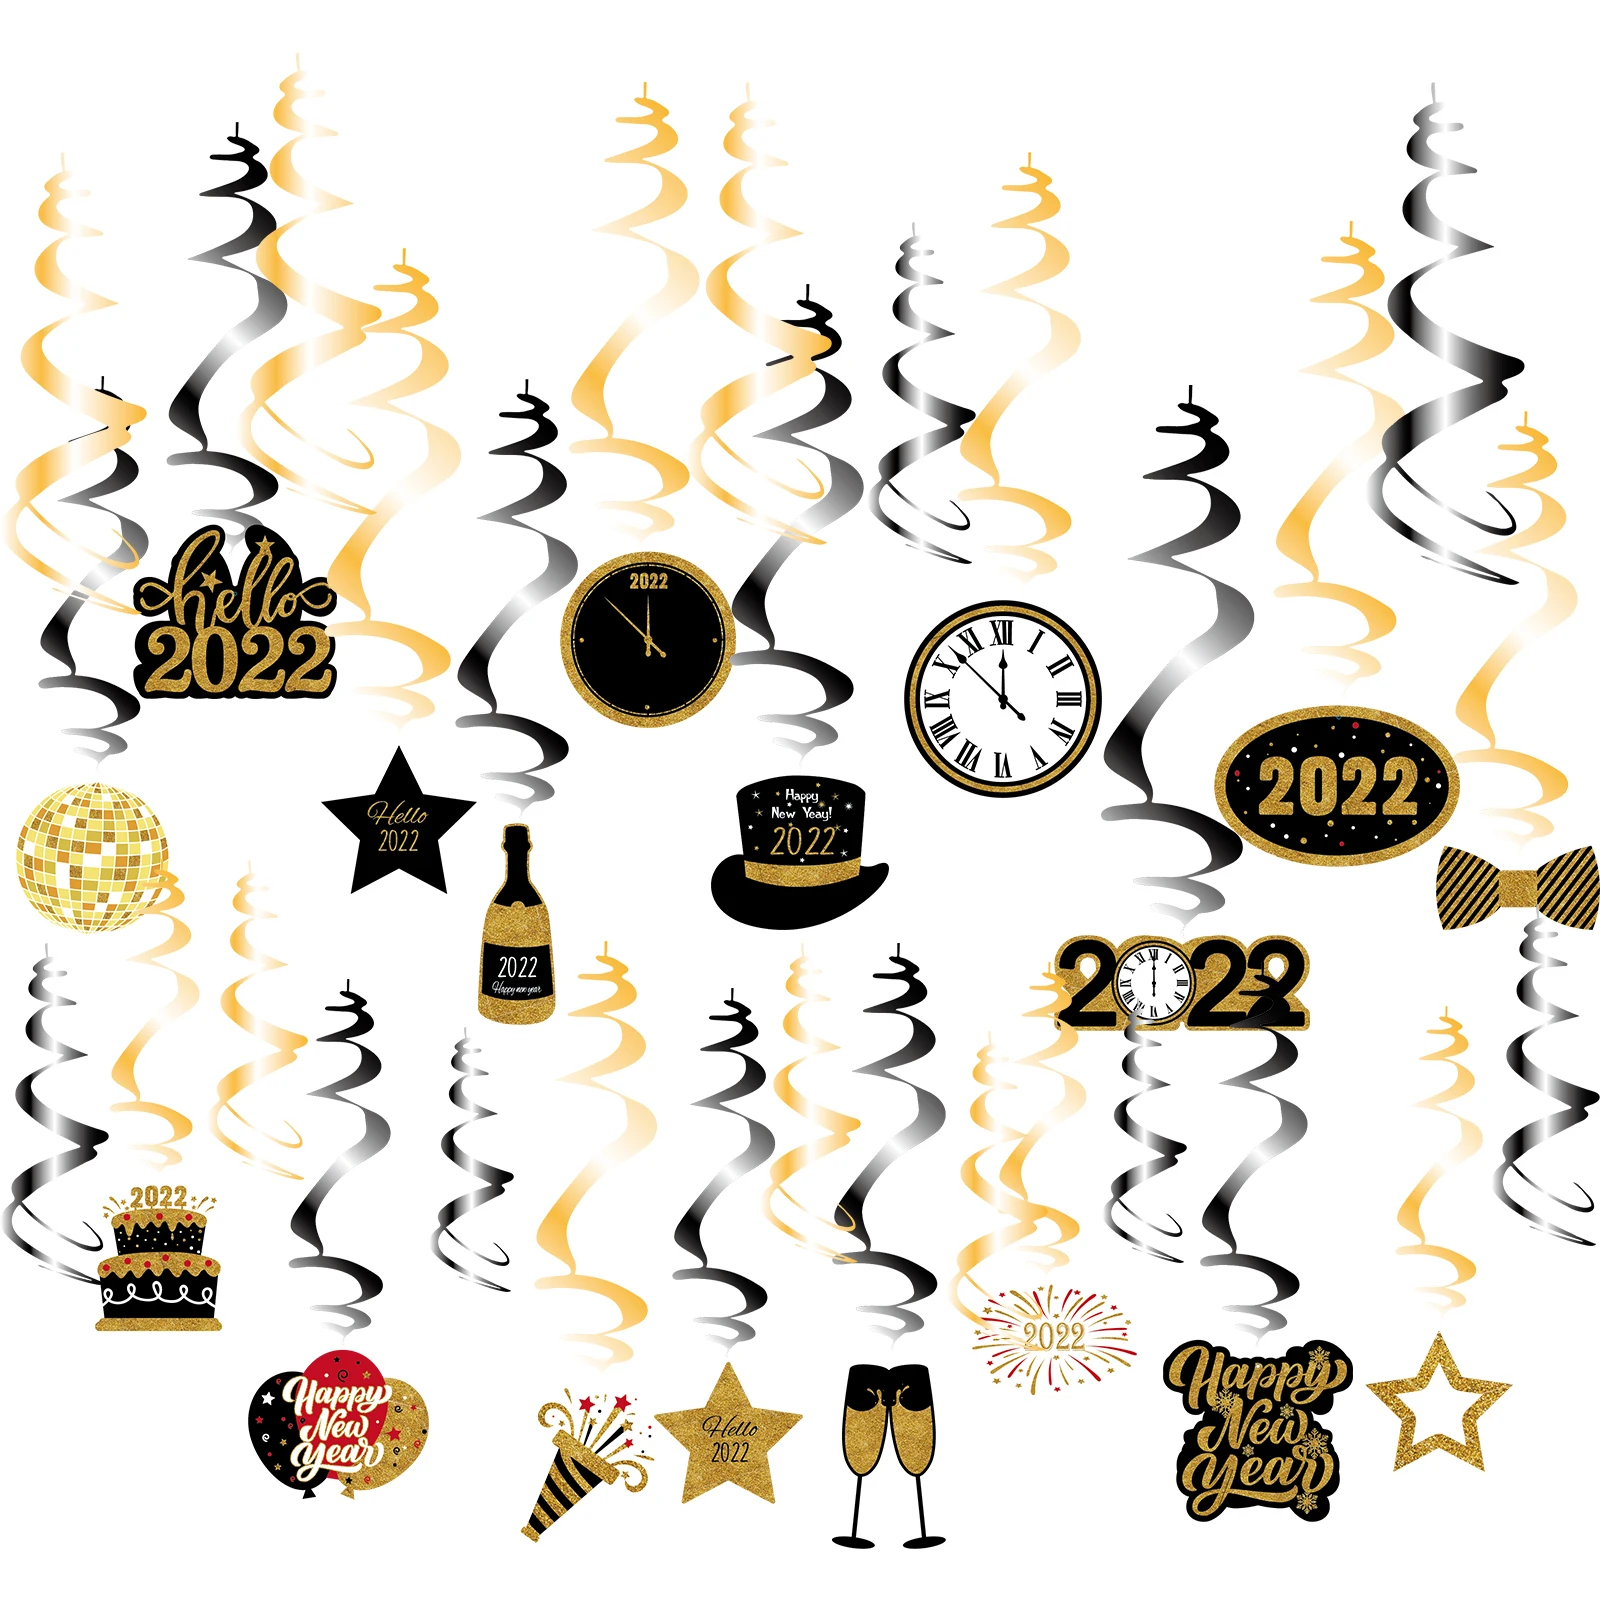 

2023 New Year Swirl Decoration 30 Pack Black Gold New Year Party Spiral Supplies